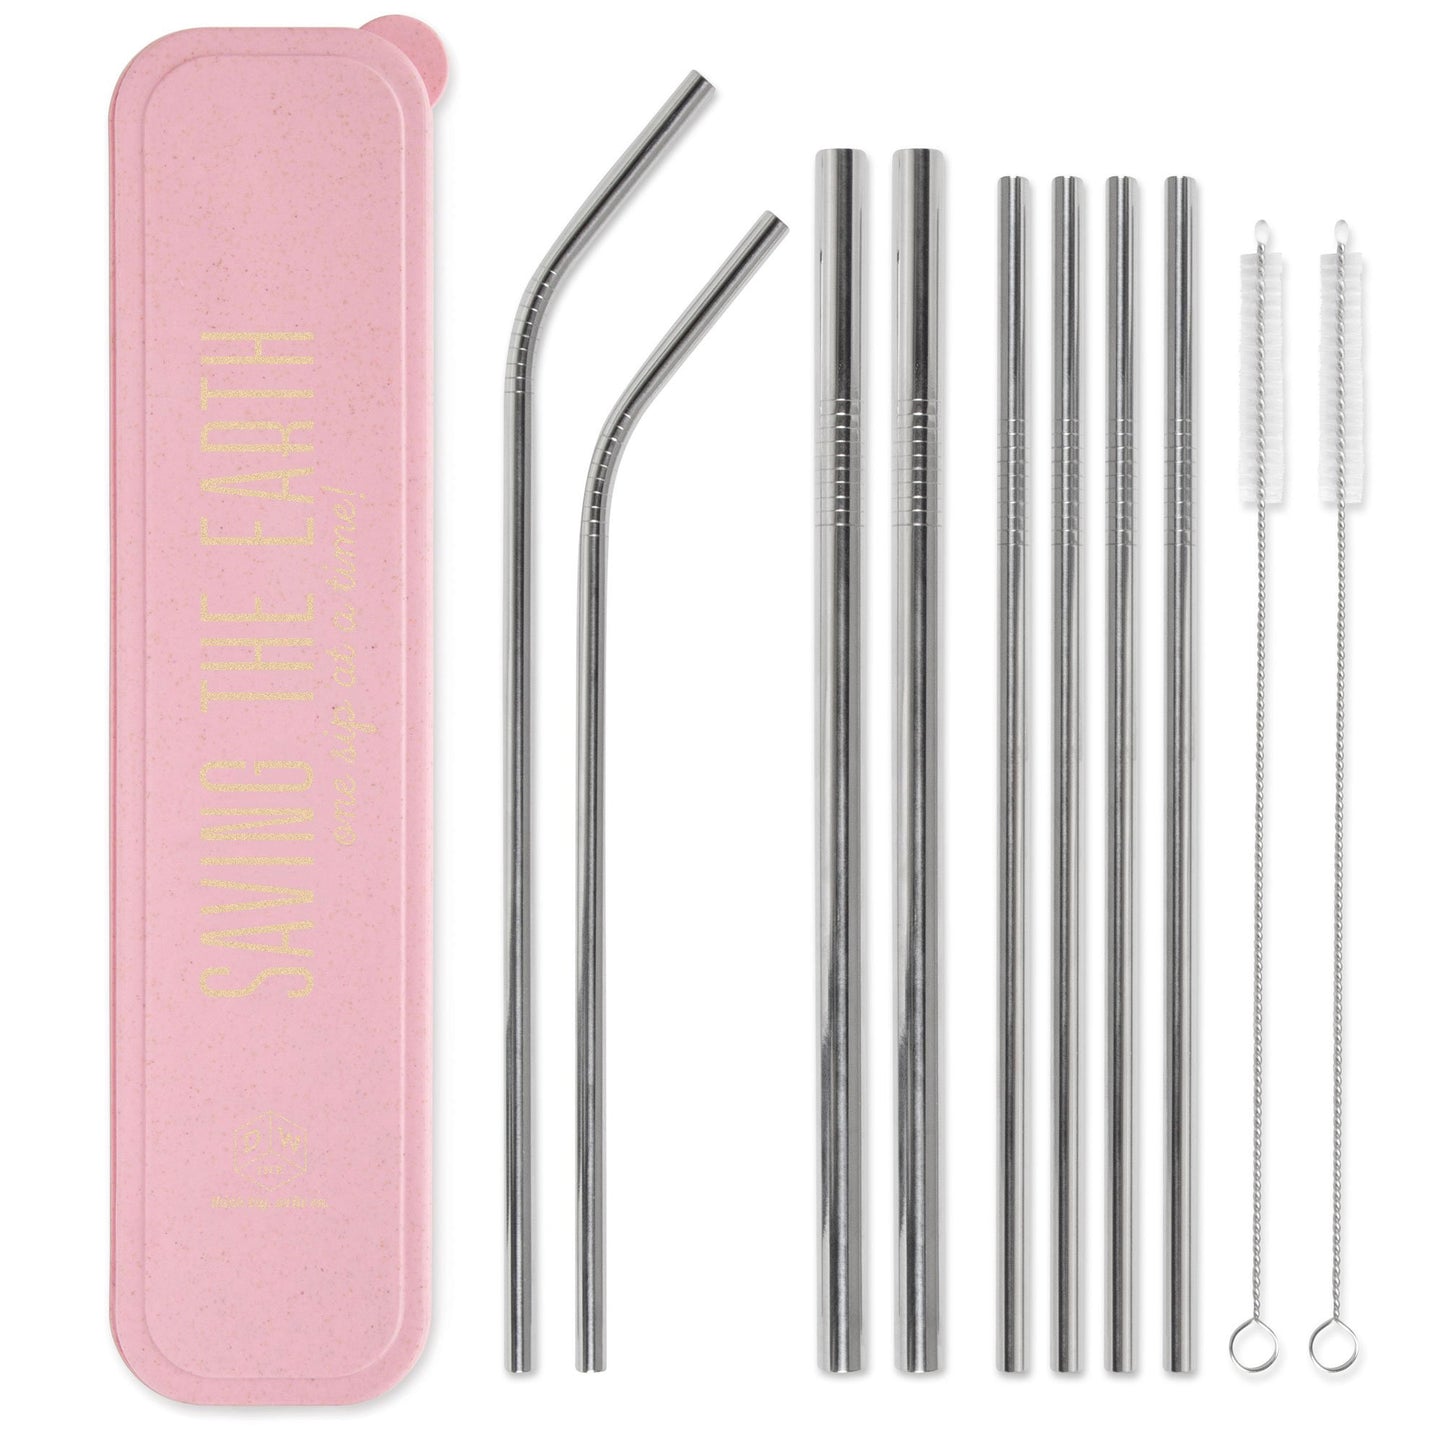 Stainless Steel Straw Set - "Saving The Earth One Sip At A Time"